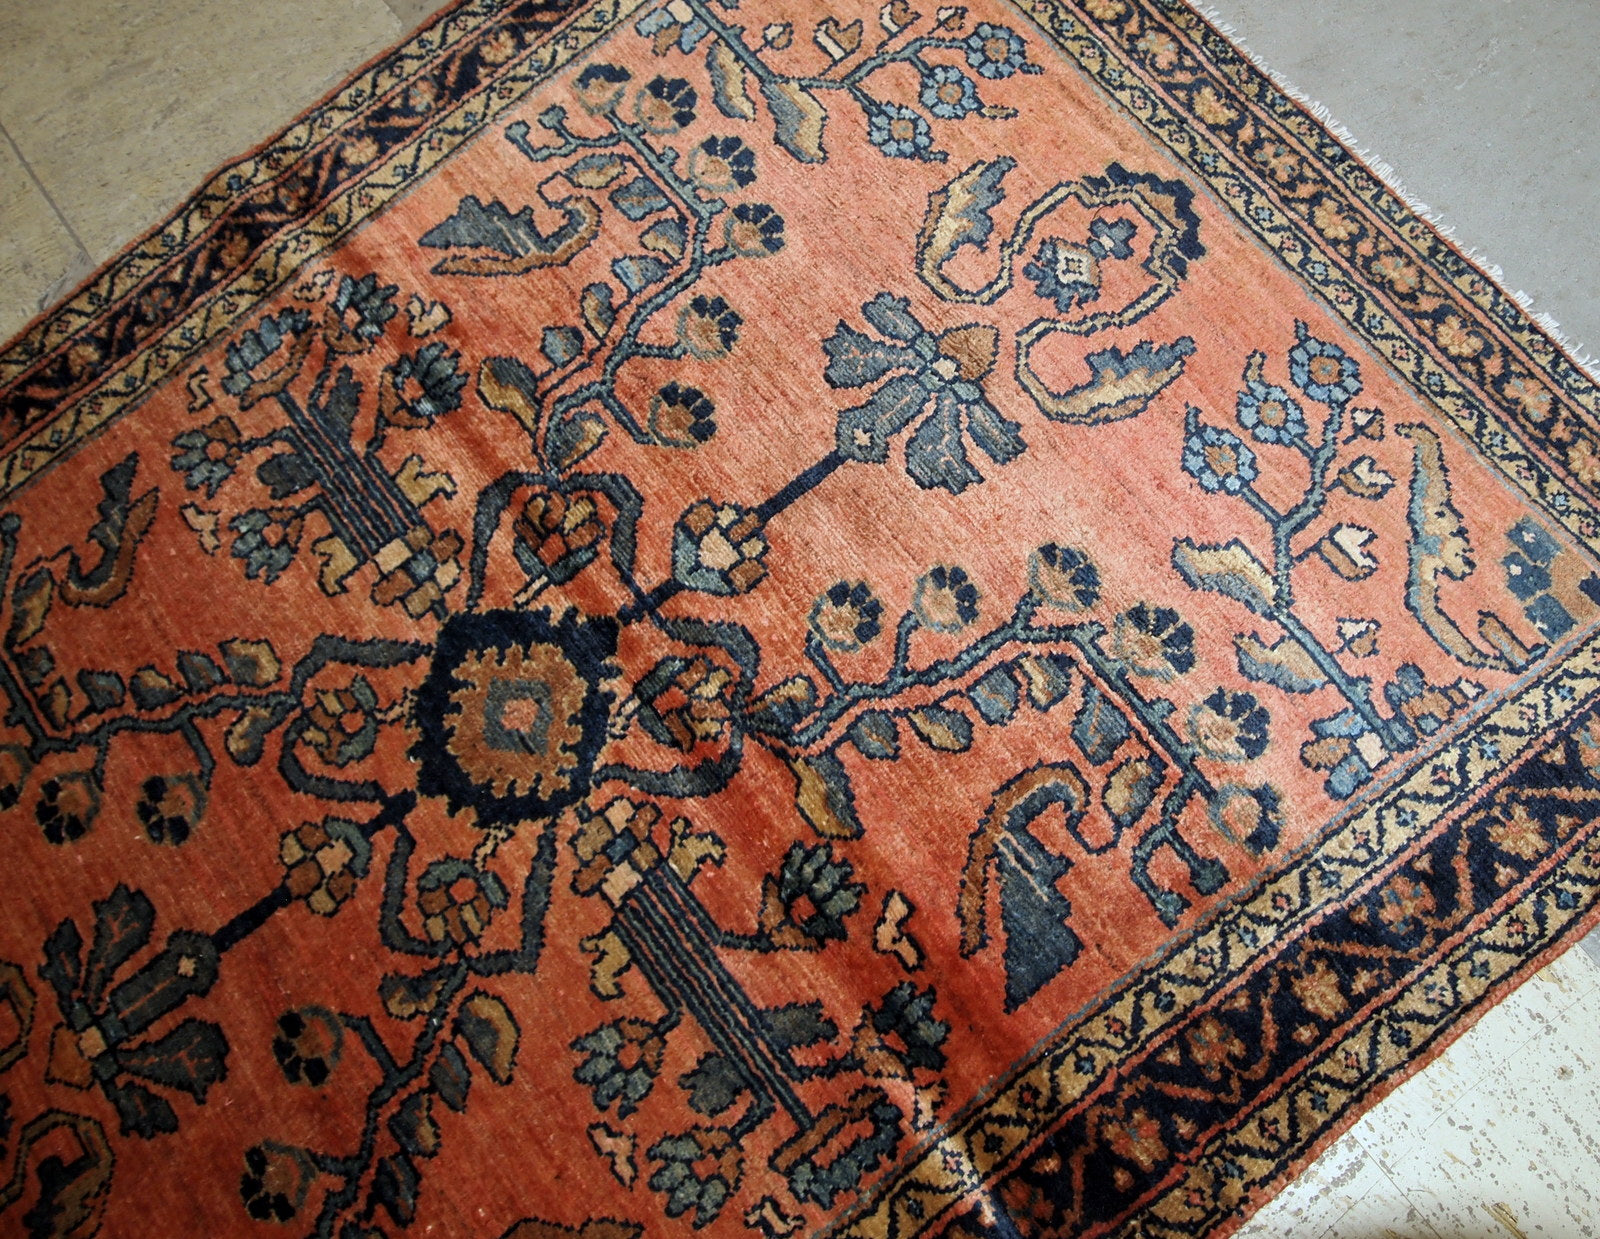 Antique hand made Lilihan rug in red shade with geometric/floral design. The rug is in original good condition from 1920s.